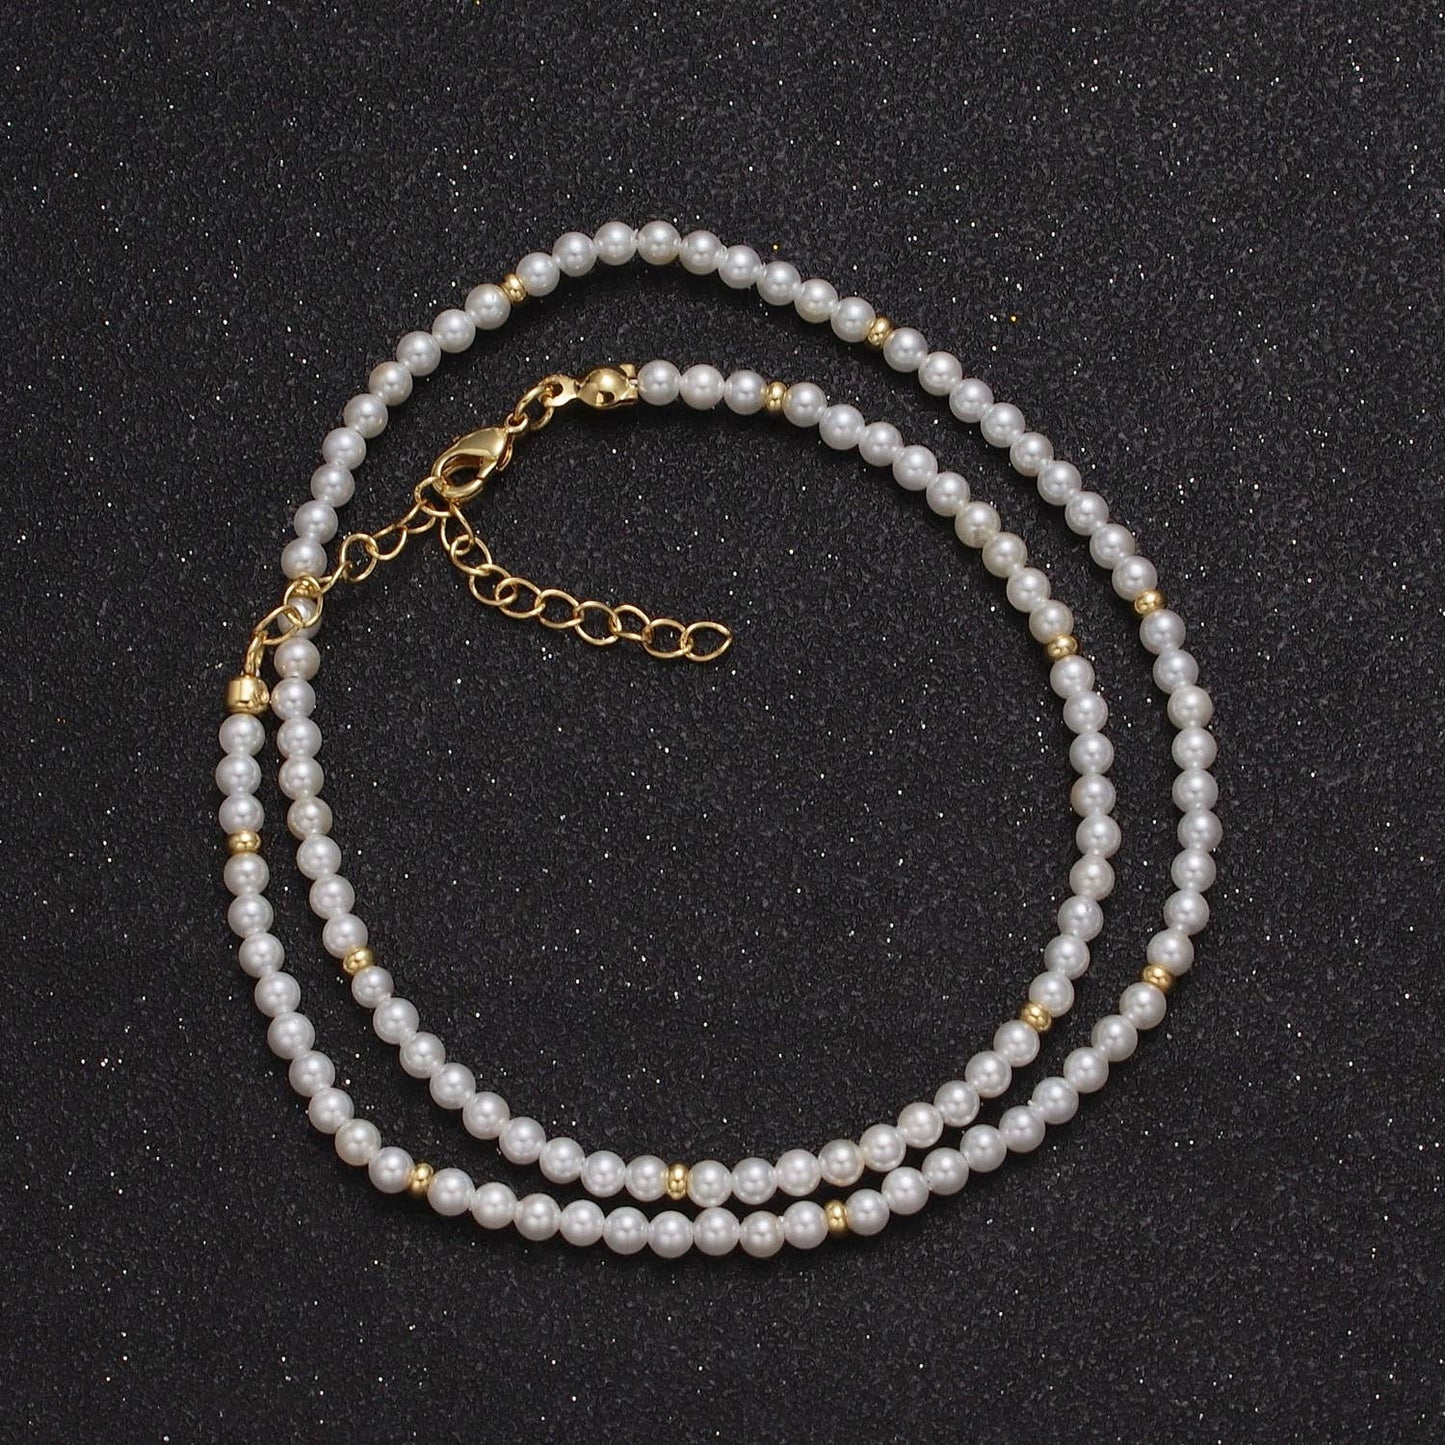 Handmade Fresh Water Pearl and Gold Beaded Necklace